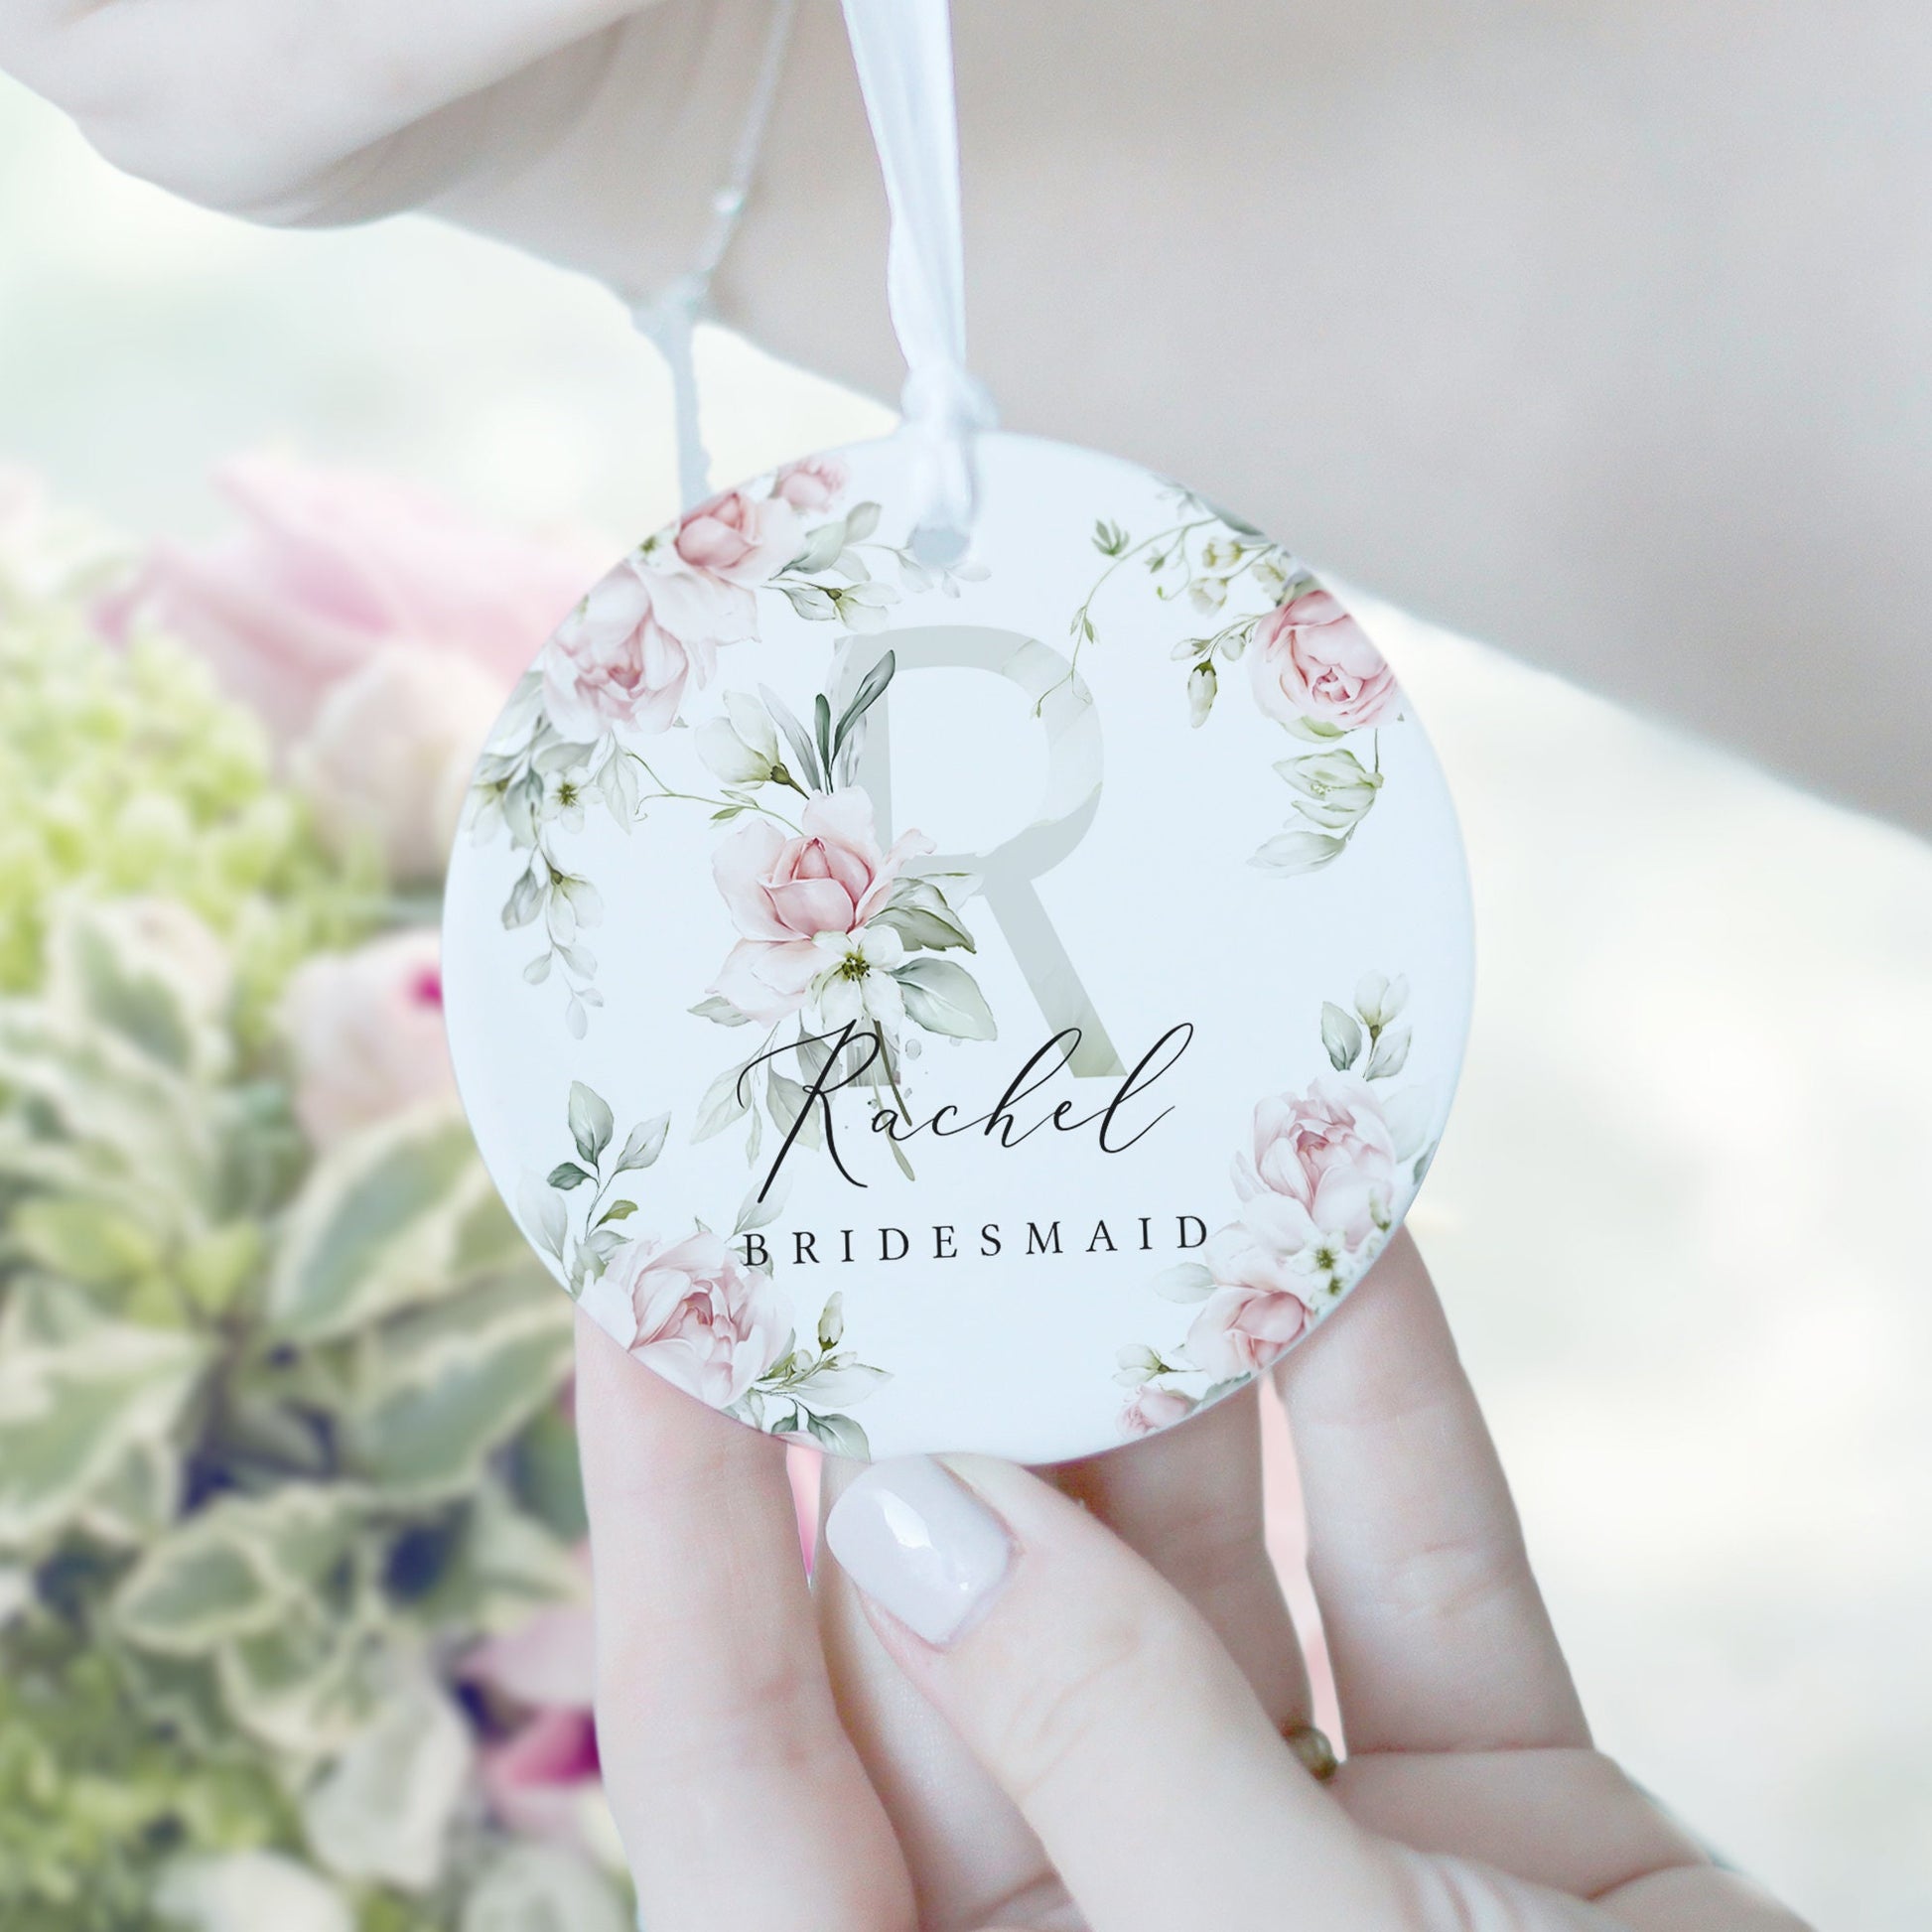 Personalised Bridesmaid Ornament, Bridesmaid Proposal Gift, Maid of Honour Gift, Will You Be Bridesmaid Gift Idea, Bridesmaid Proposal